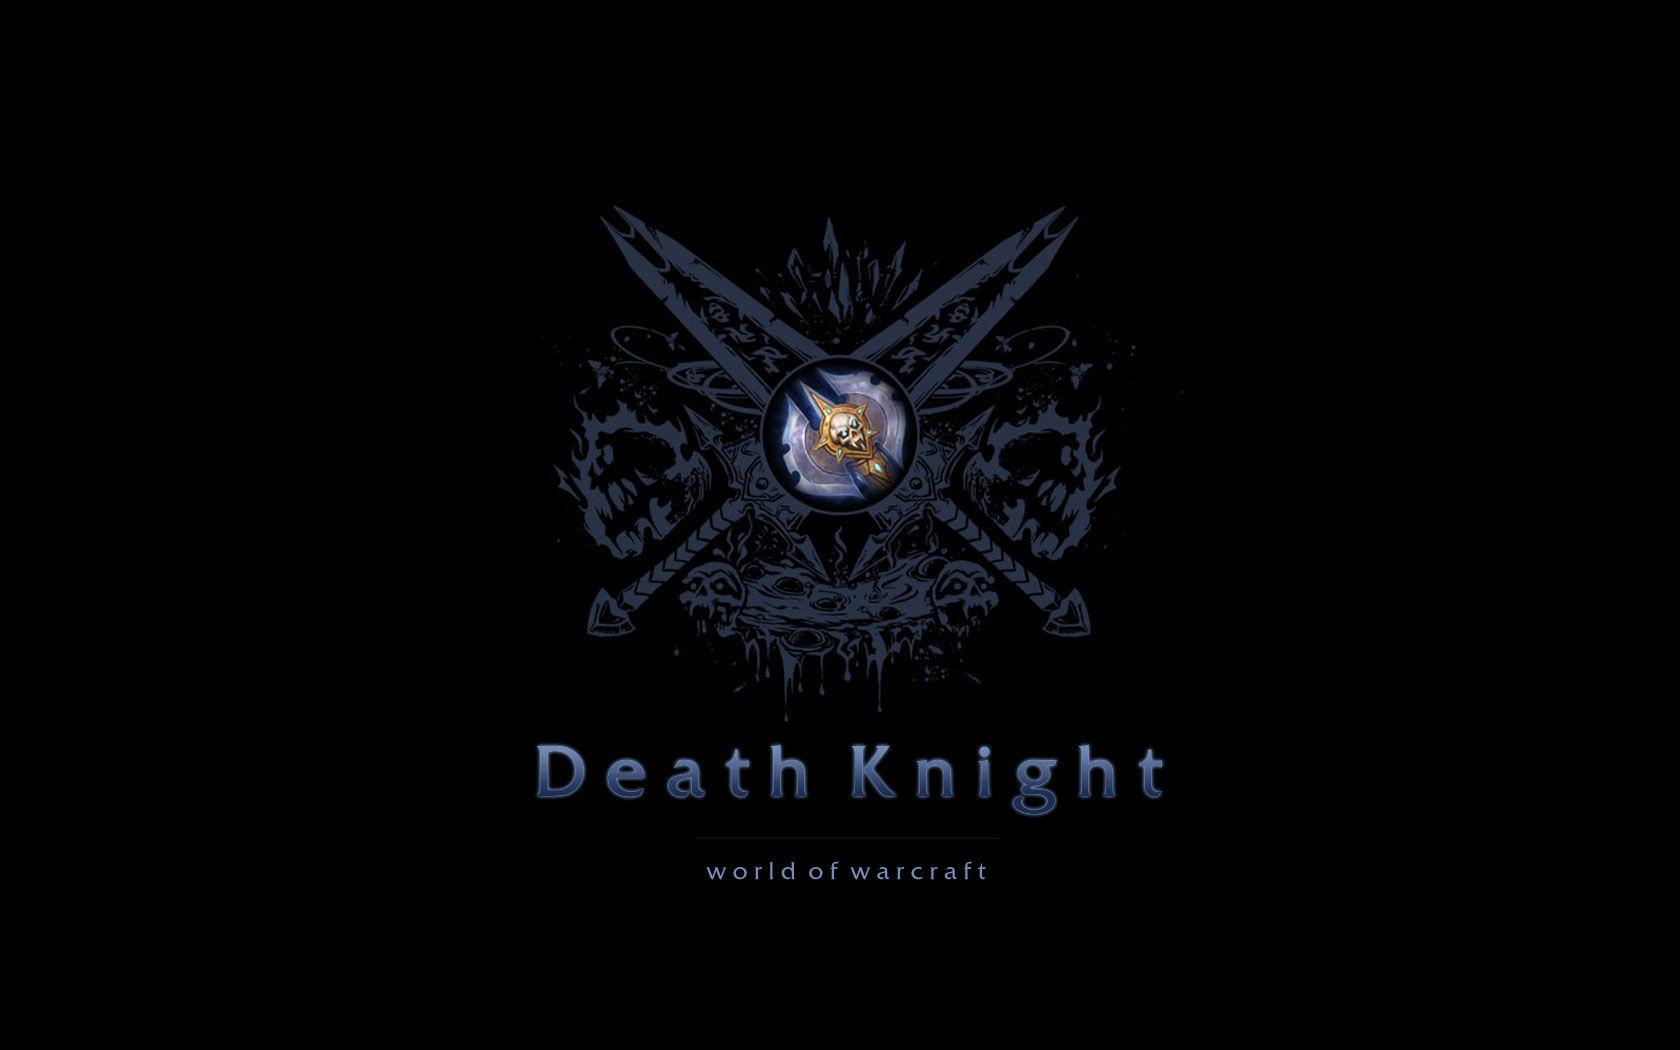 Download the Death Knight Seal Wallpaper, Death Knight Seal iPhone